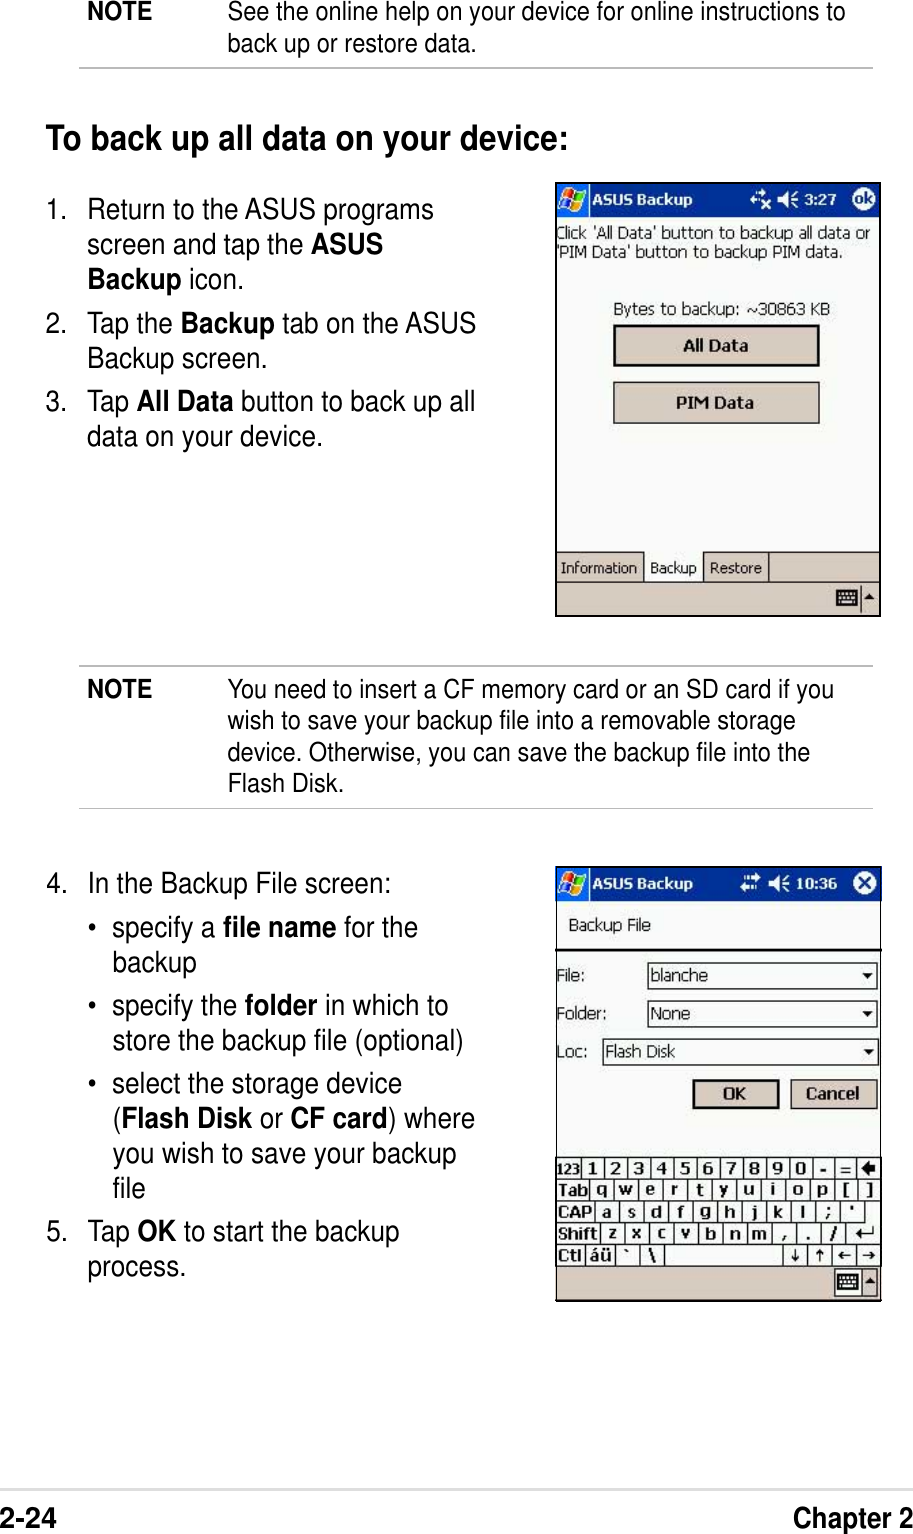 2-24Chapter 21. Return to the ASUS programsscreen and tap the ASUSBackup icon.2. Tap the Backup tab on the ASUSBackup screen.3. Tap All Data button to back up alldata on your device.To back up all data on your device:4. In the Backup File screen:•specify a file name for thebackup•specify the folder in which tostore the backup file (optional)•select the storage device(Flash Disk or CF card) whereyou wish to save your backupfile5. Tap OK to start the backupprocess.NOTE You need to insert a CF memory card or an SD card if youwish to save your backup file into a removable storagedevice. Otherwise, you can save the backup file into theFlash Disk.NOTE See the online help on your device for online instructions toback up or restore data.